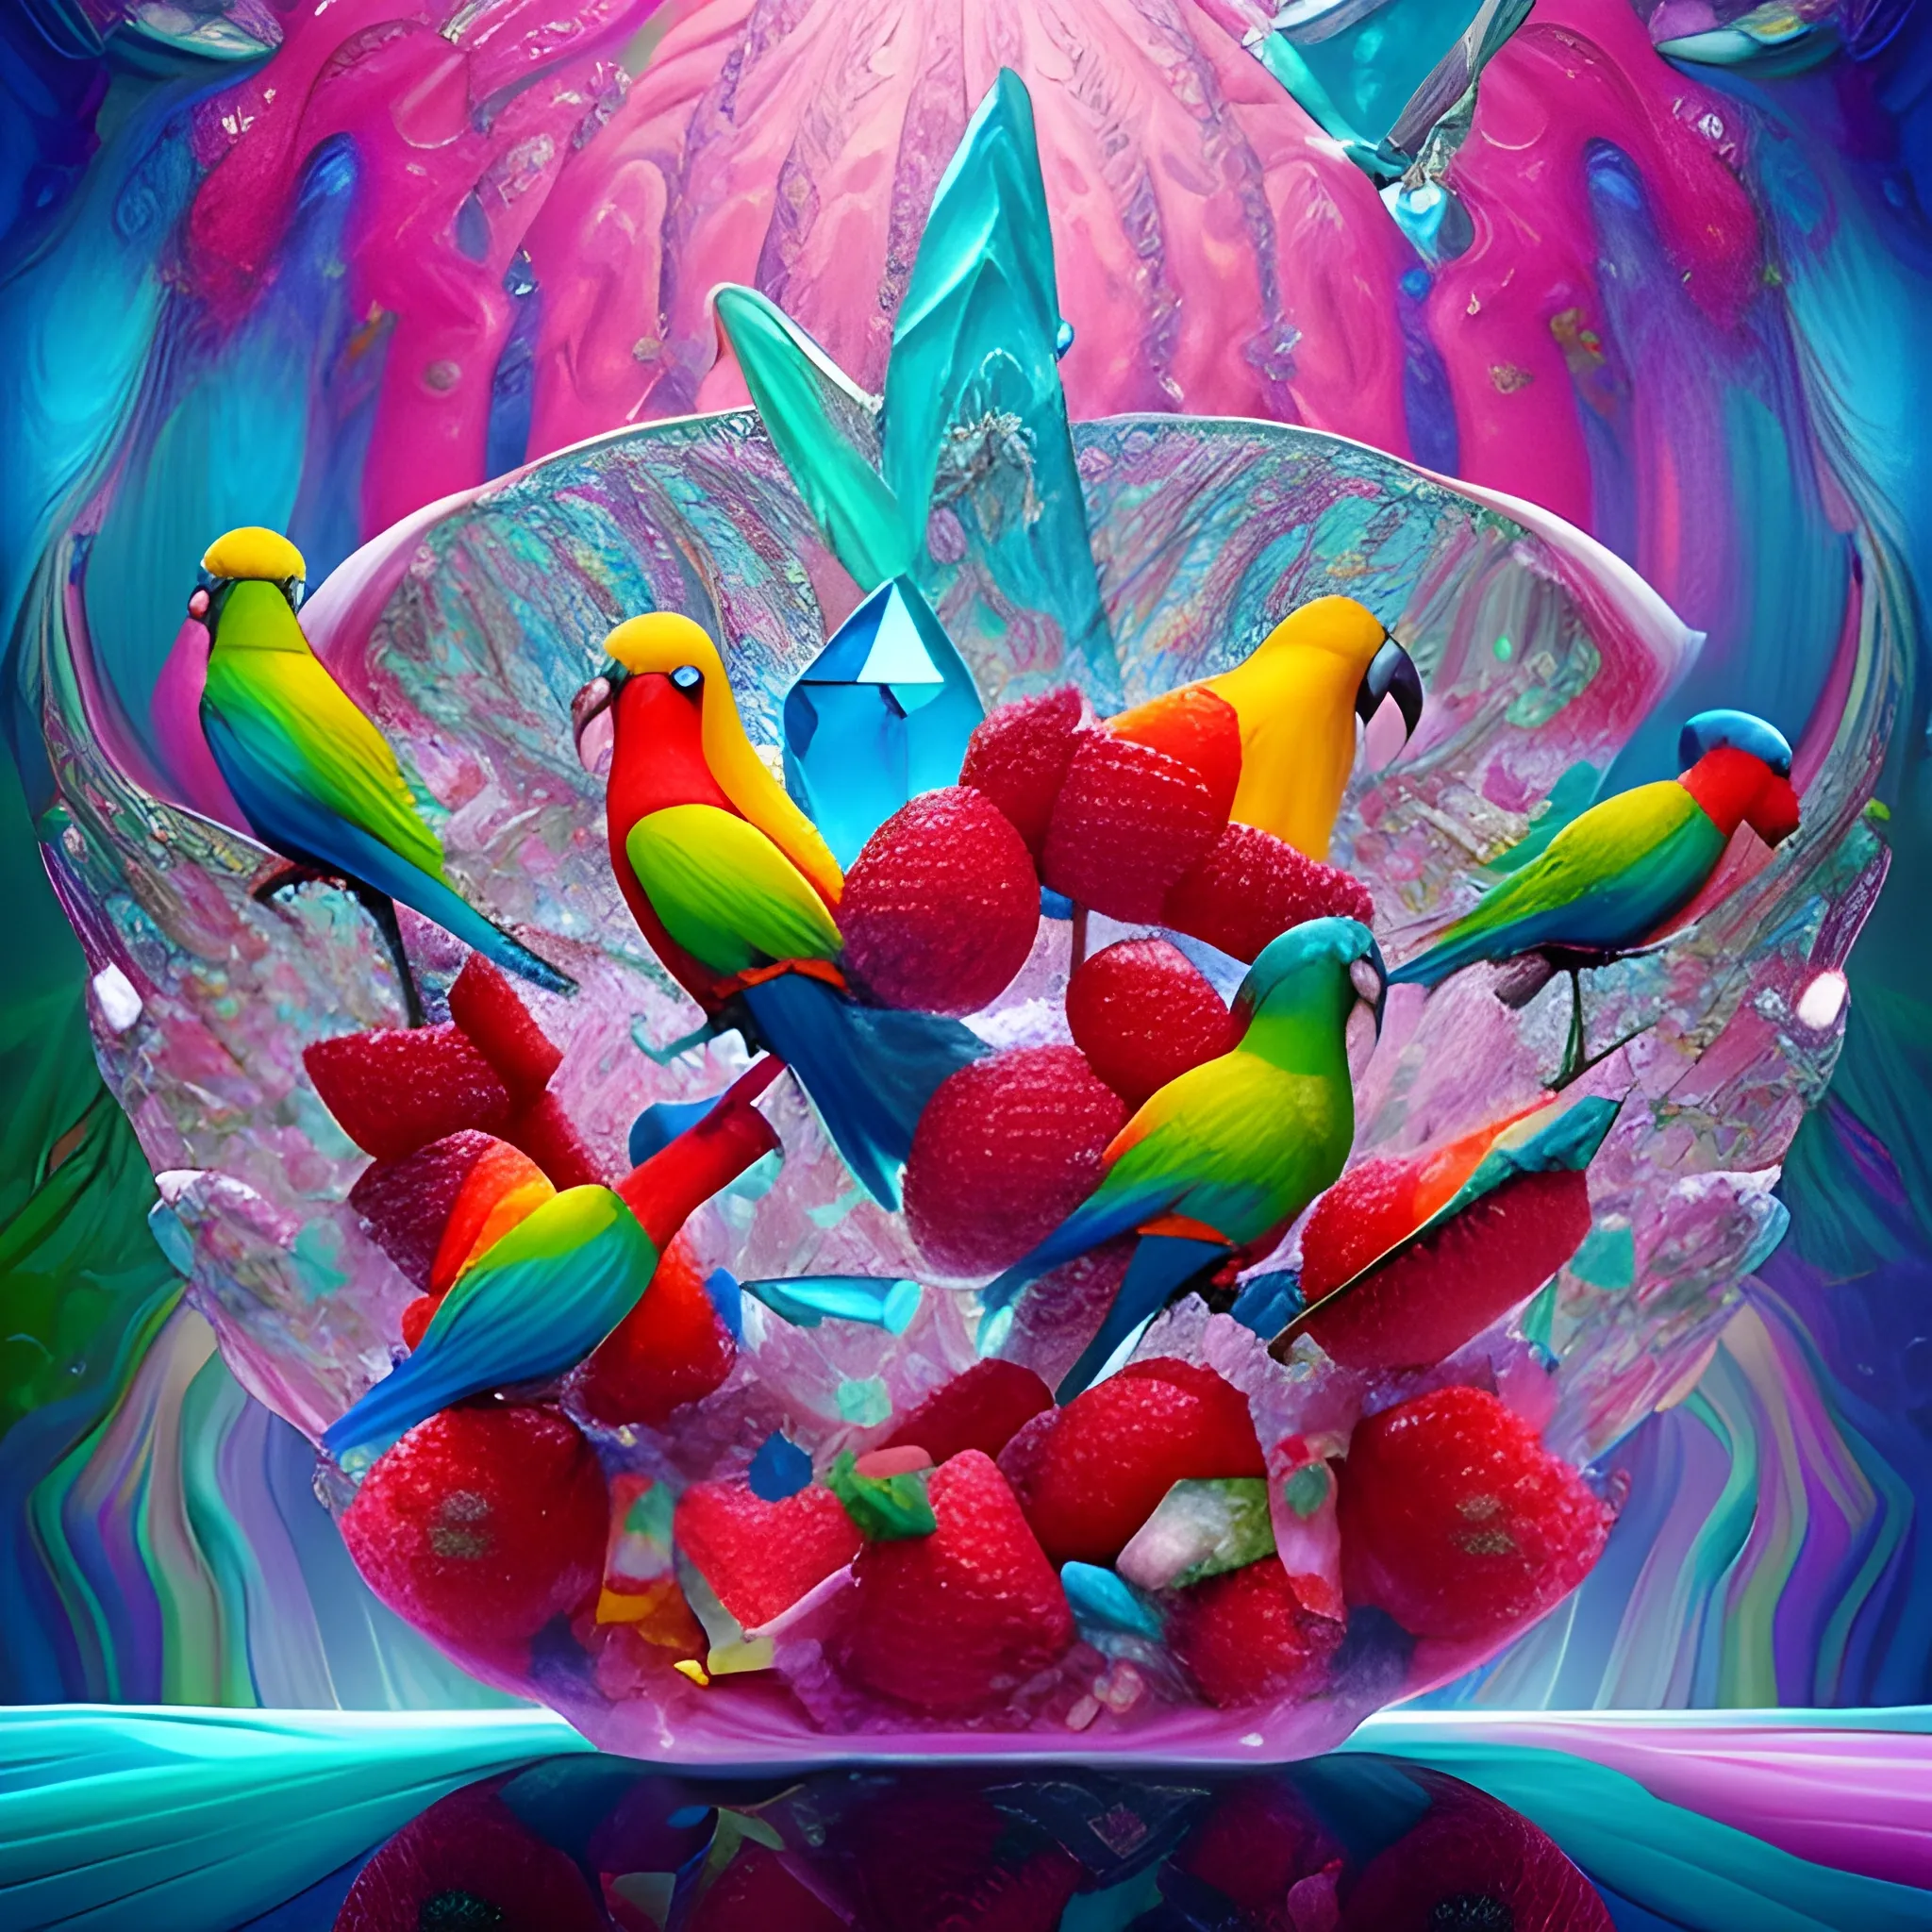 make a  sculpture of many crystal crazy raspberries with human face, crystal birds of paradise and  parrots around, many ice cubes  in the air, many plans of Amazon Rainforest, saturated colors, surrealism, chaotic background, 3D, Trippy,  eerie atmosphere, close up, Oil Painting, wide dynamic range, wide-angle view  